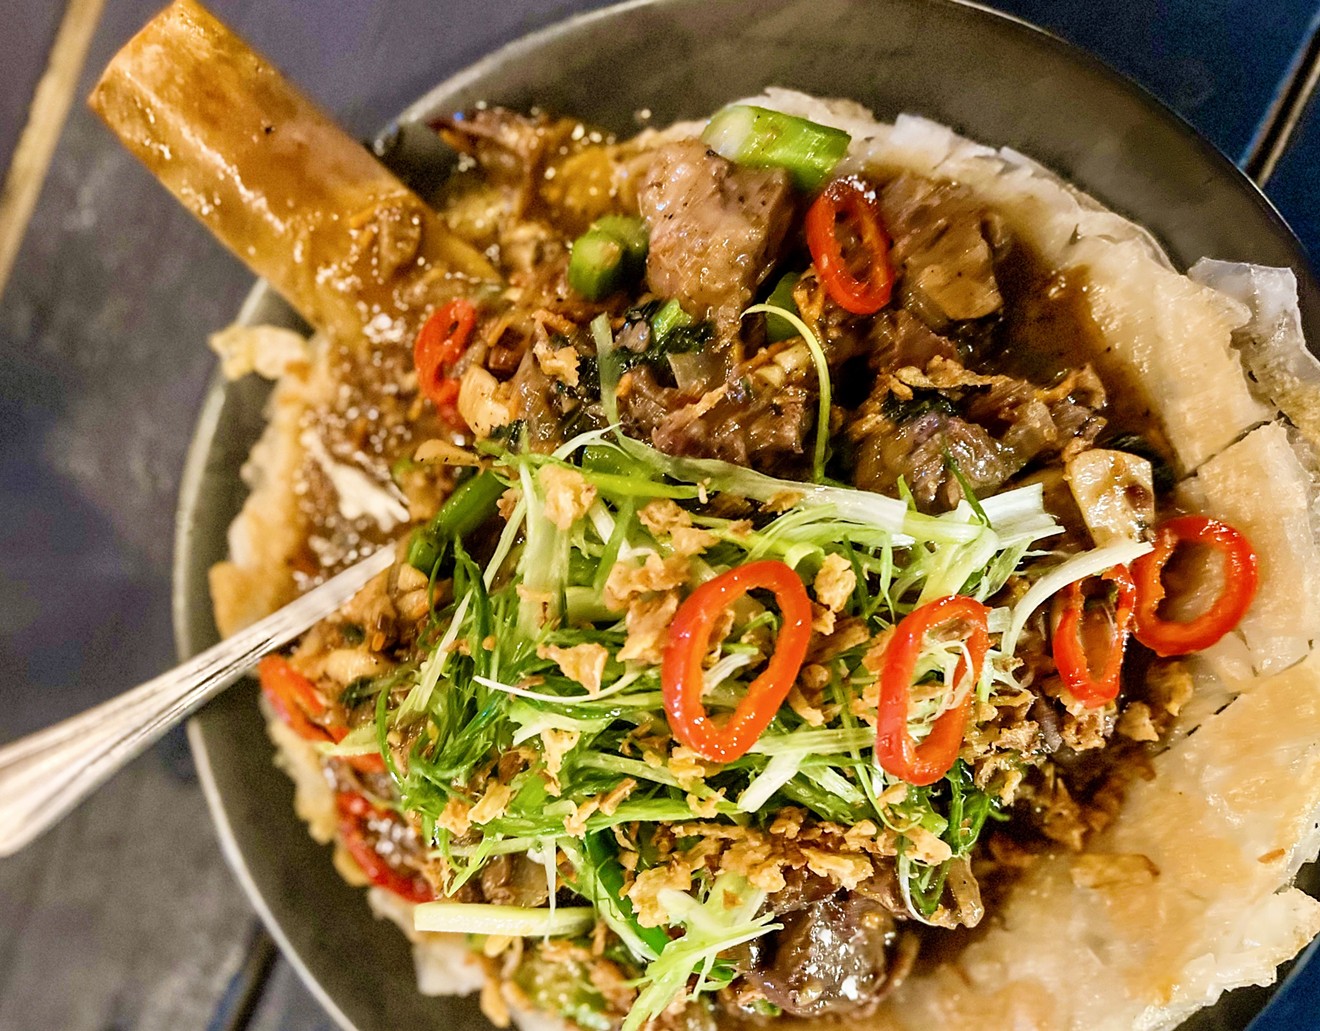 The Smoked Beef Rib Flat Rice Noodles are a masterpiece.